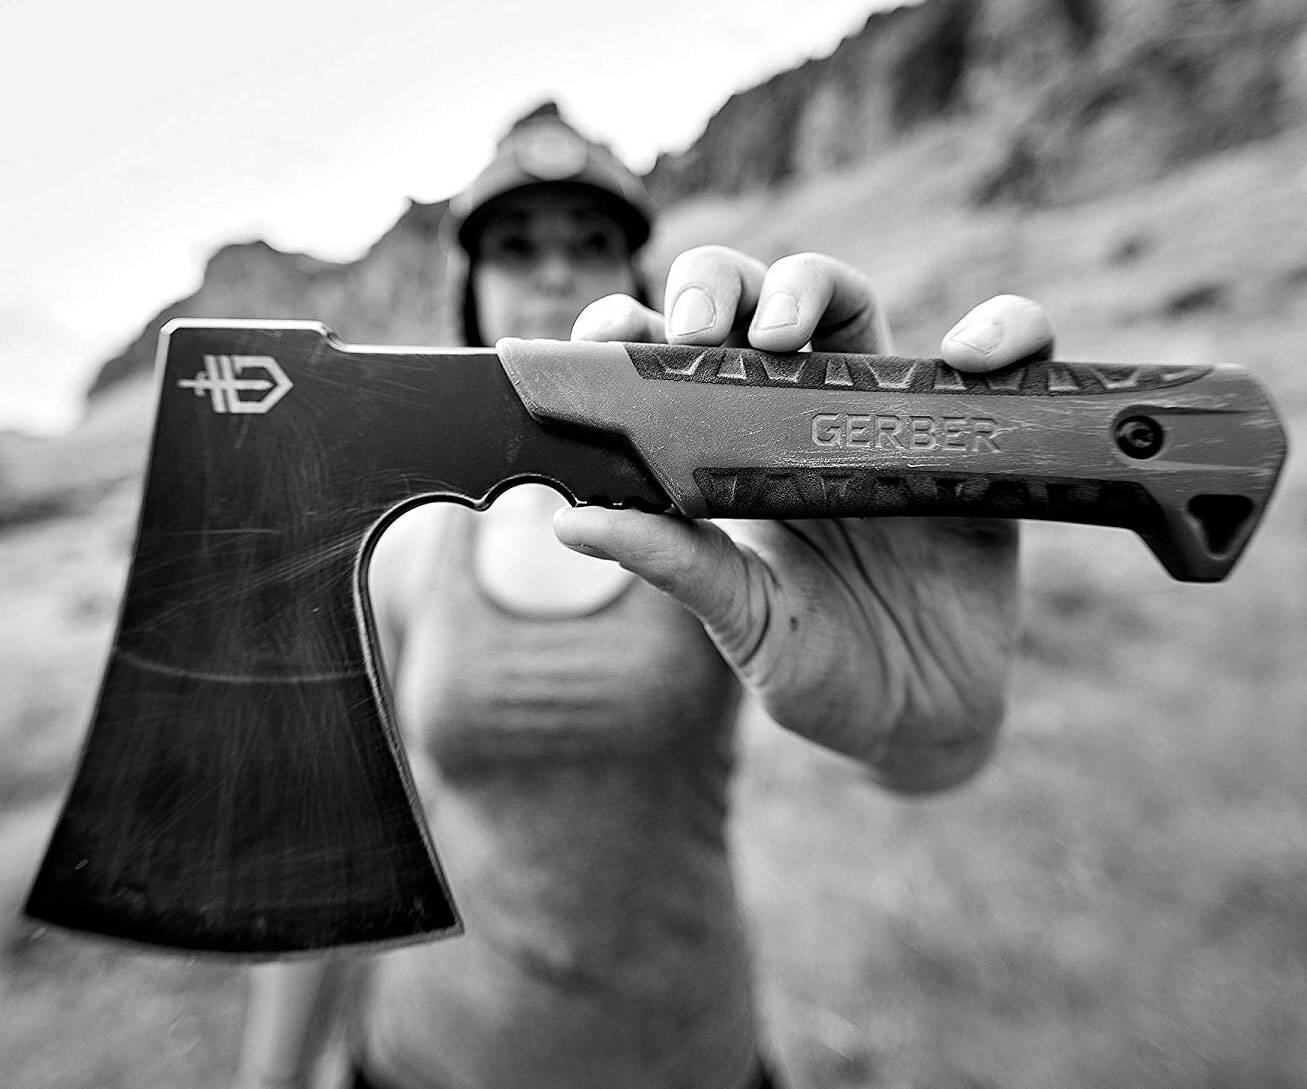 Gerber Hatchet Camping Axe - //coolthings.us